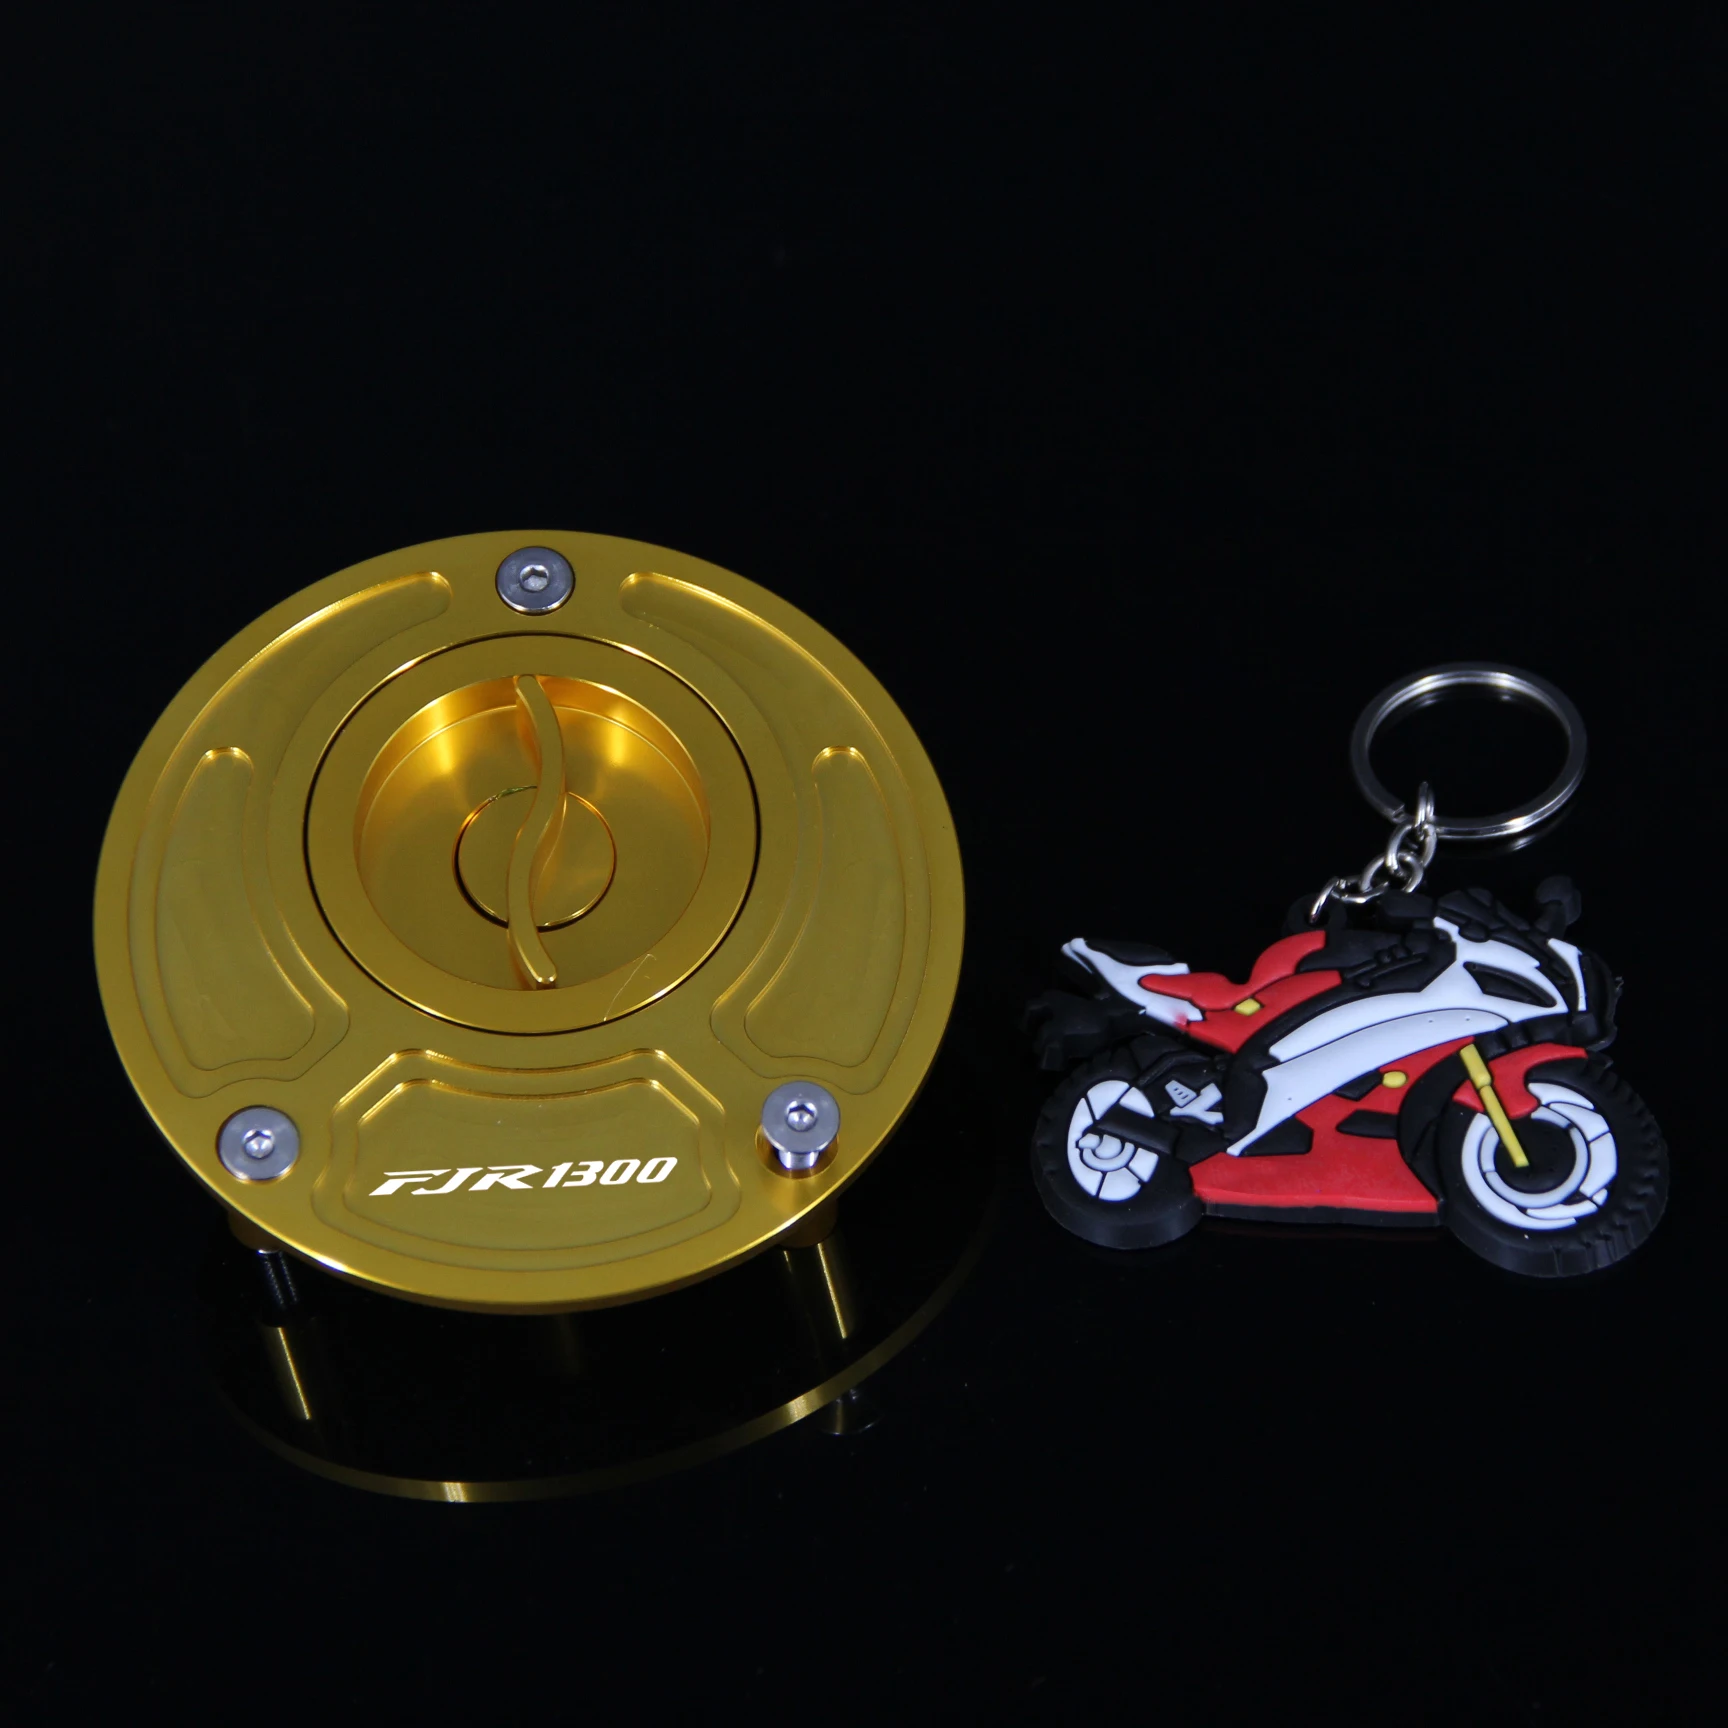 

With Logo Keyless Motorcycle Gas Cap Fuel Tank Cap Cover For Yamaha FJR 1300 FJR1300 2003